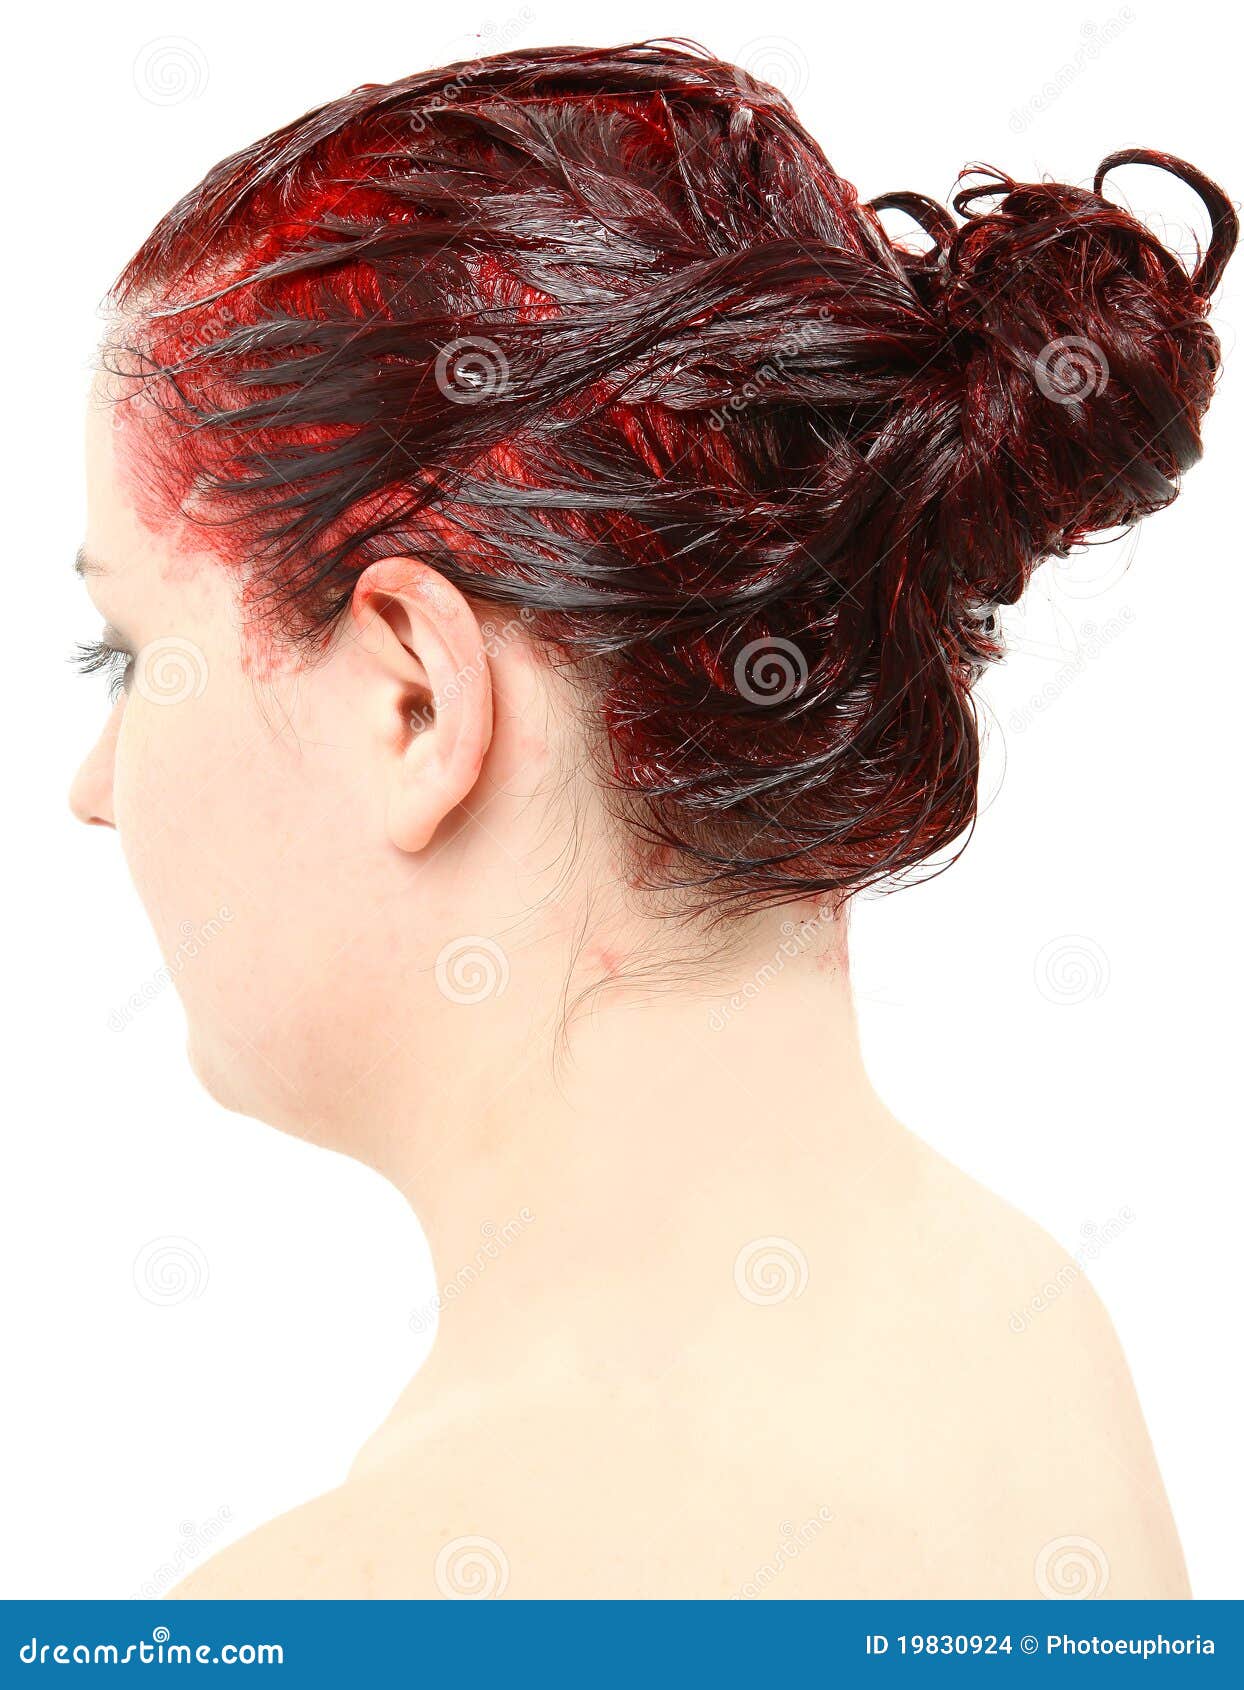 Where To Buy Bright Red Hair Dye / 30 Hottest Red Hair Color Ideas For 2021 The Trend Spotter